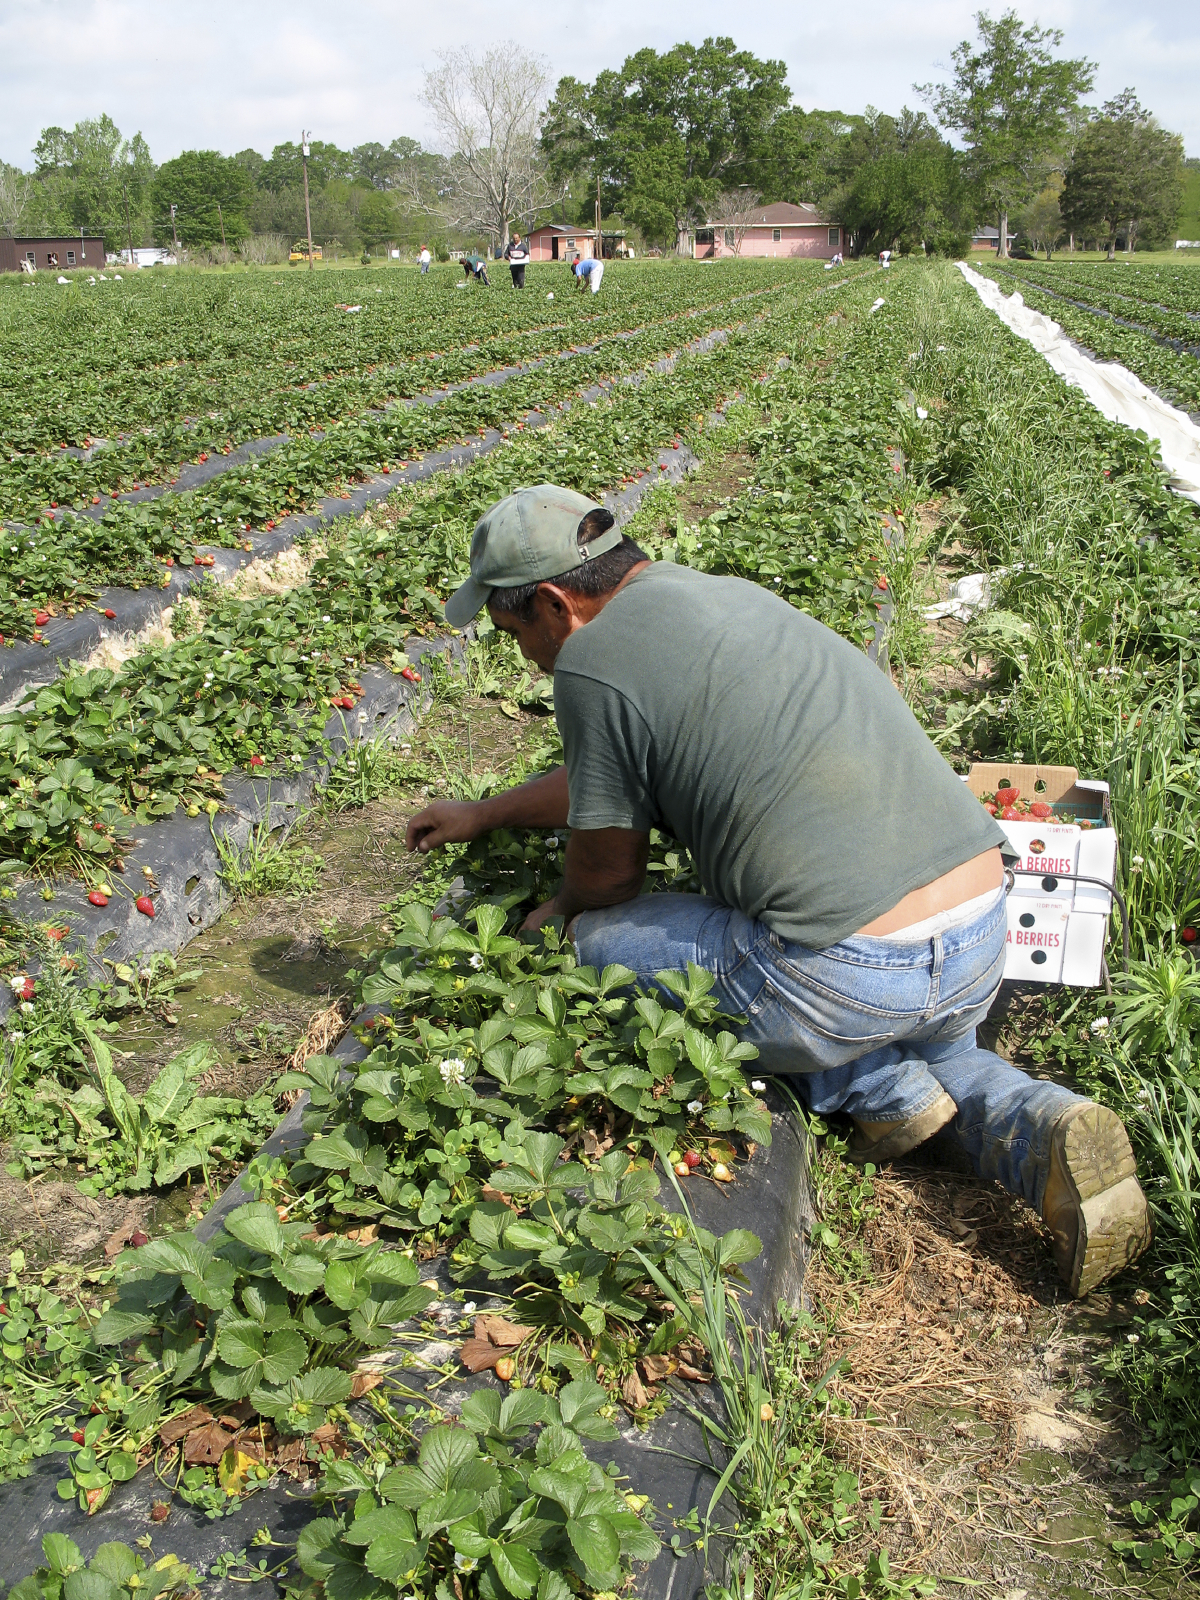 A photo depicting a migrant farm worker picking strawberries. Victims of labor t